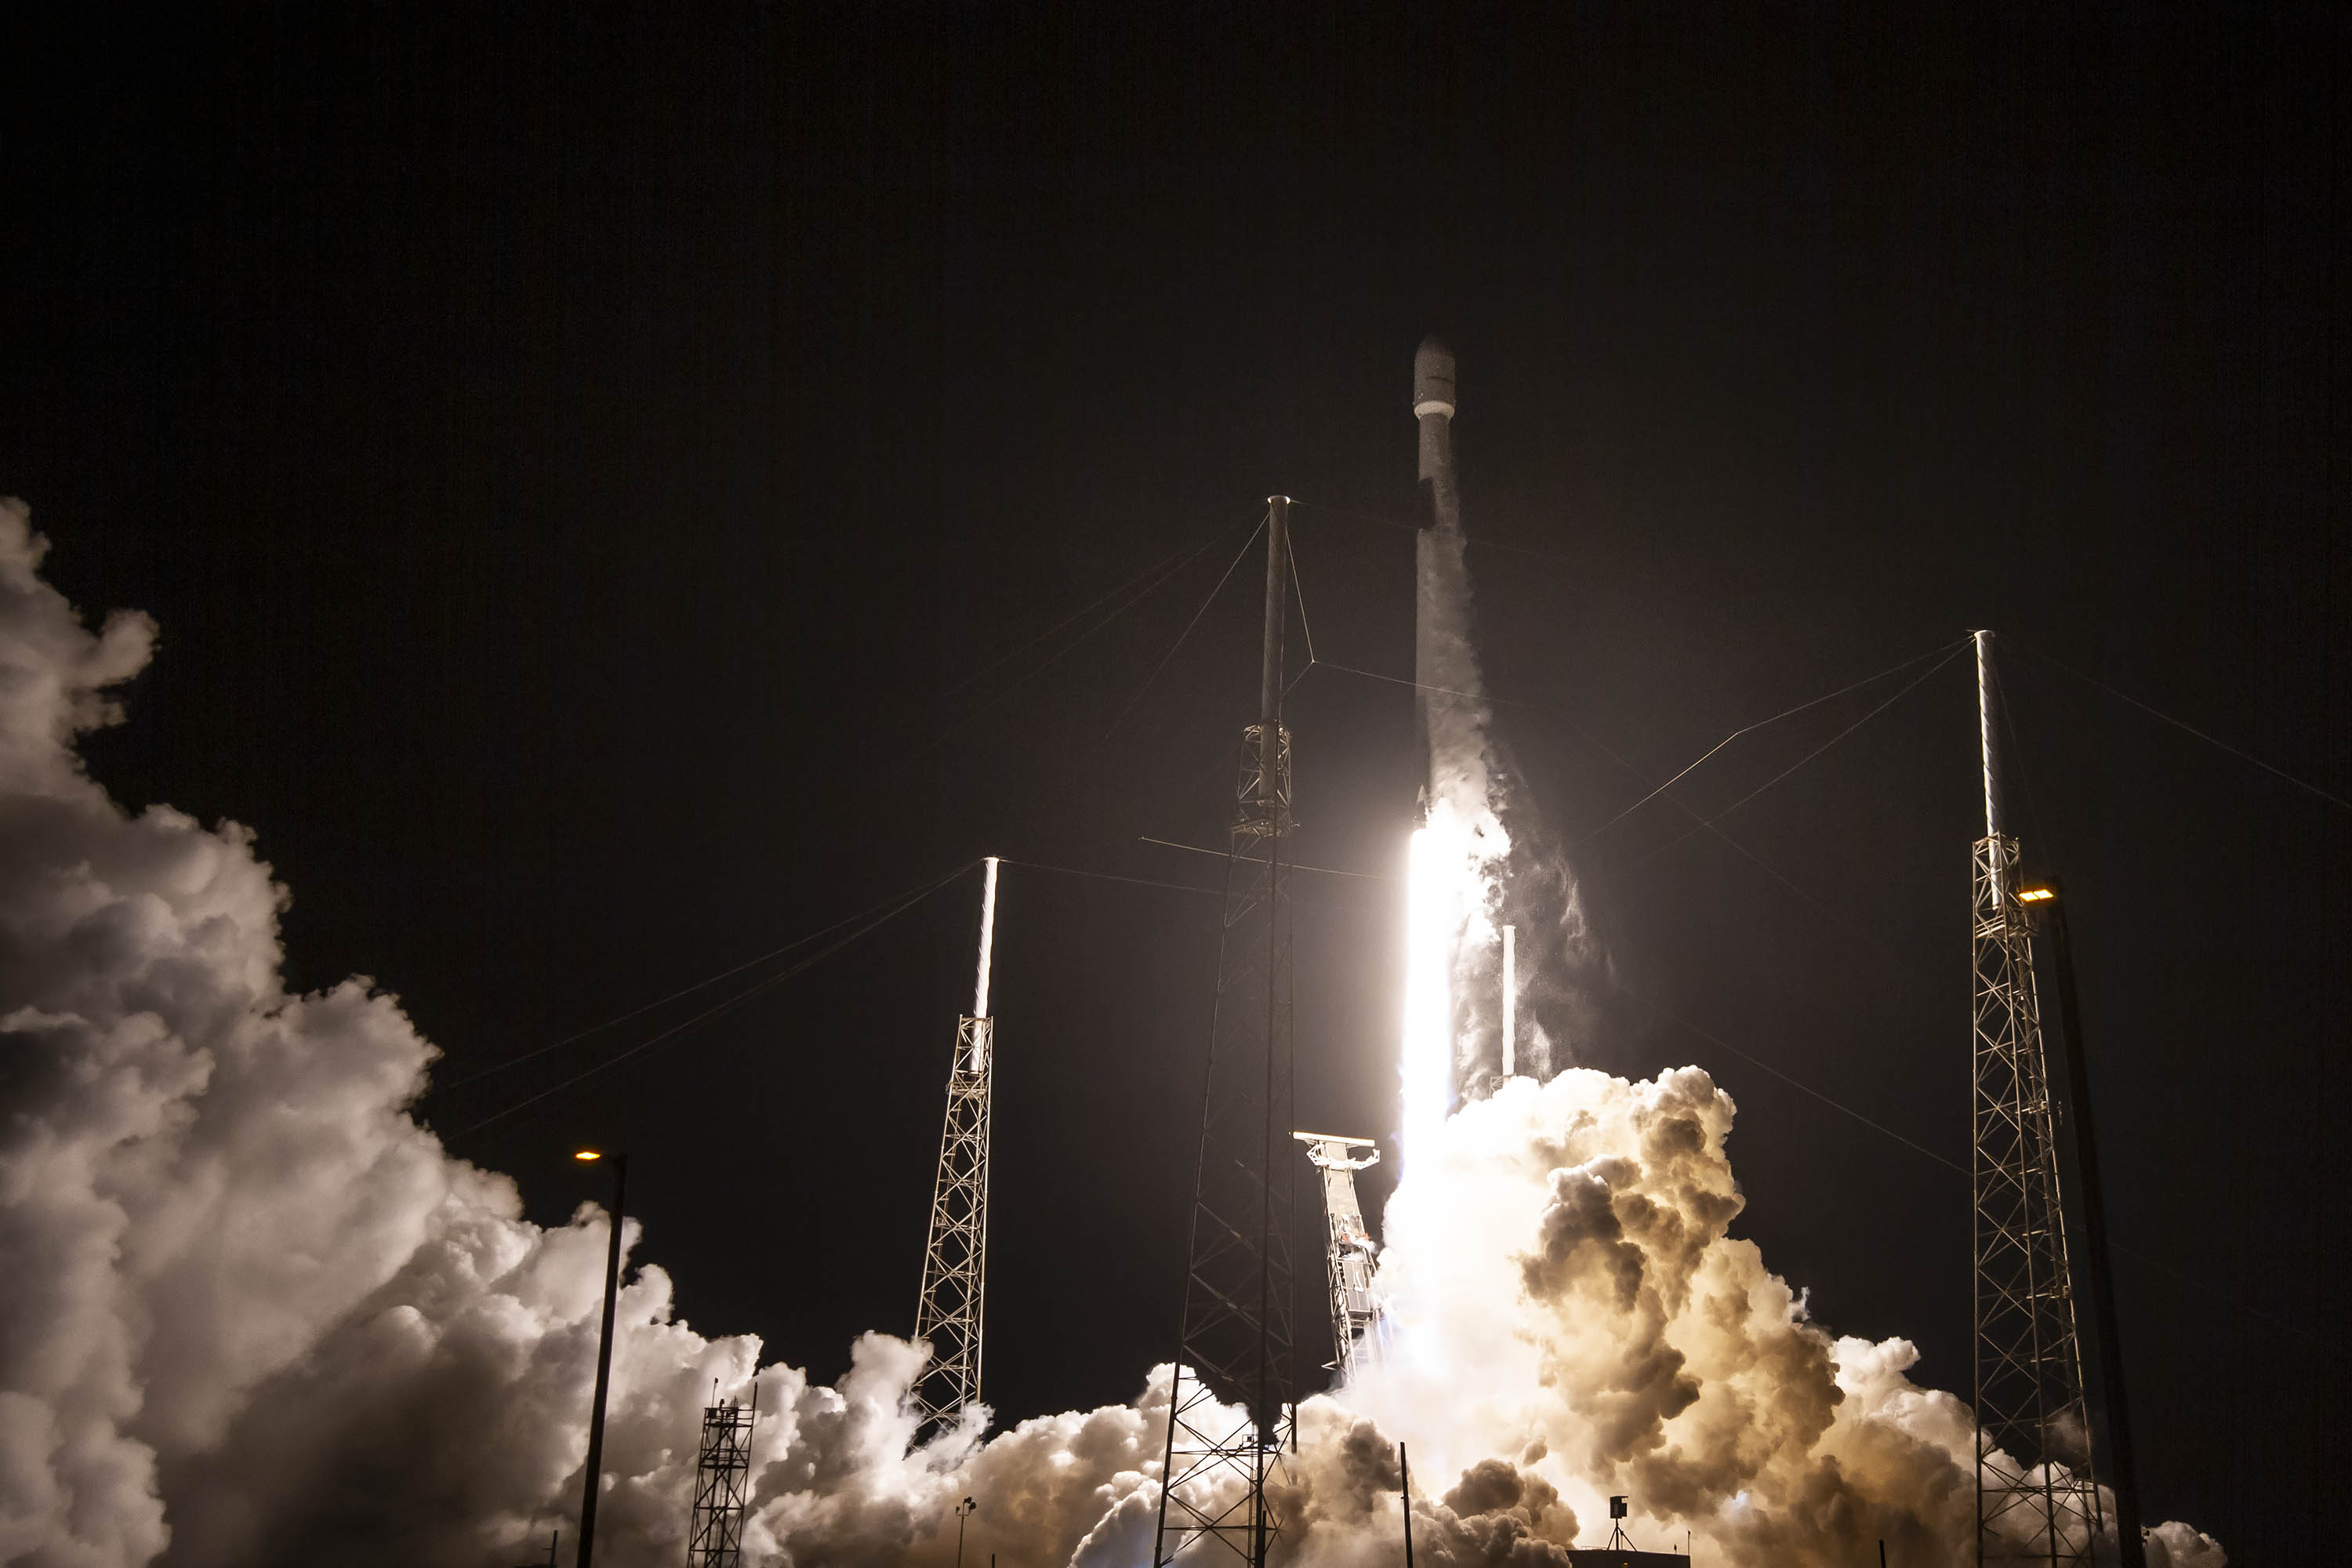 Falcon 9 launches SXM-8 to orbit on SpaceX’s 125th successful mission, Sunday, Jun 6 2021.